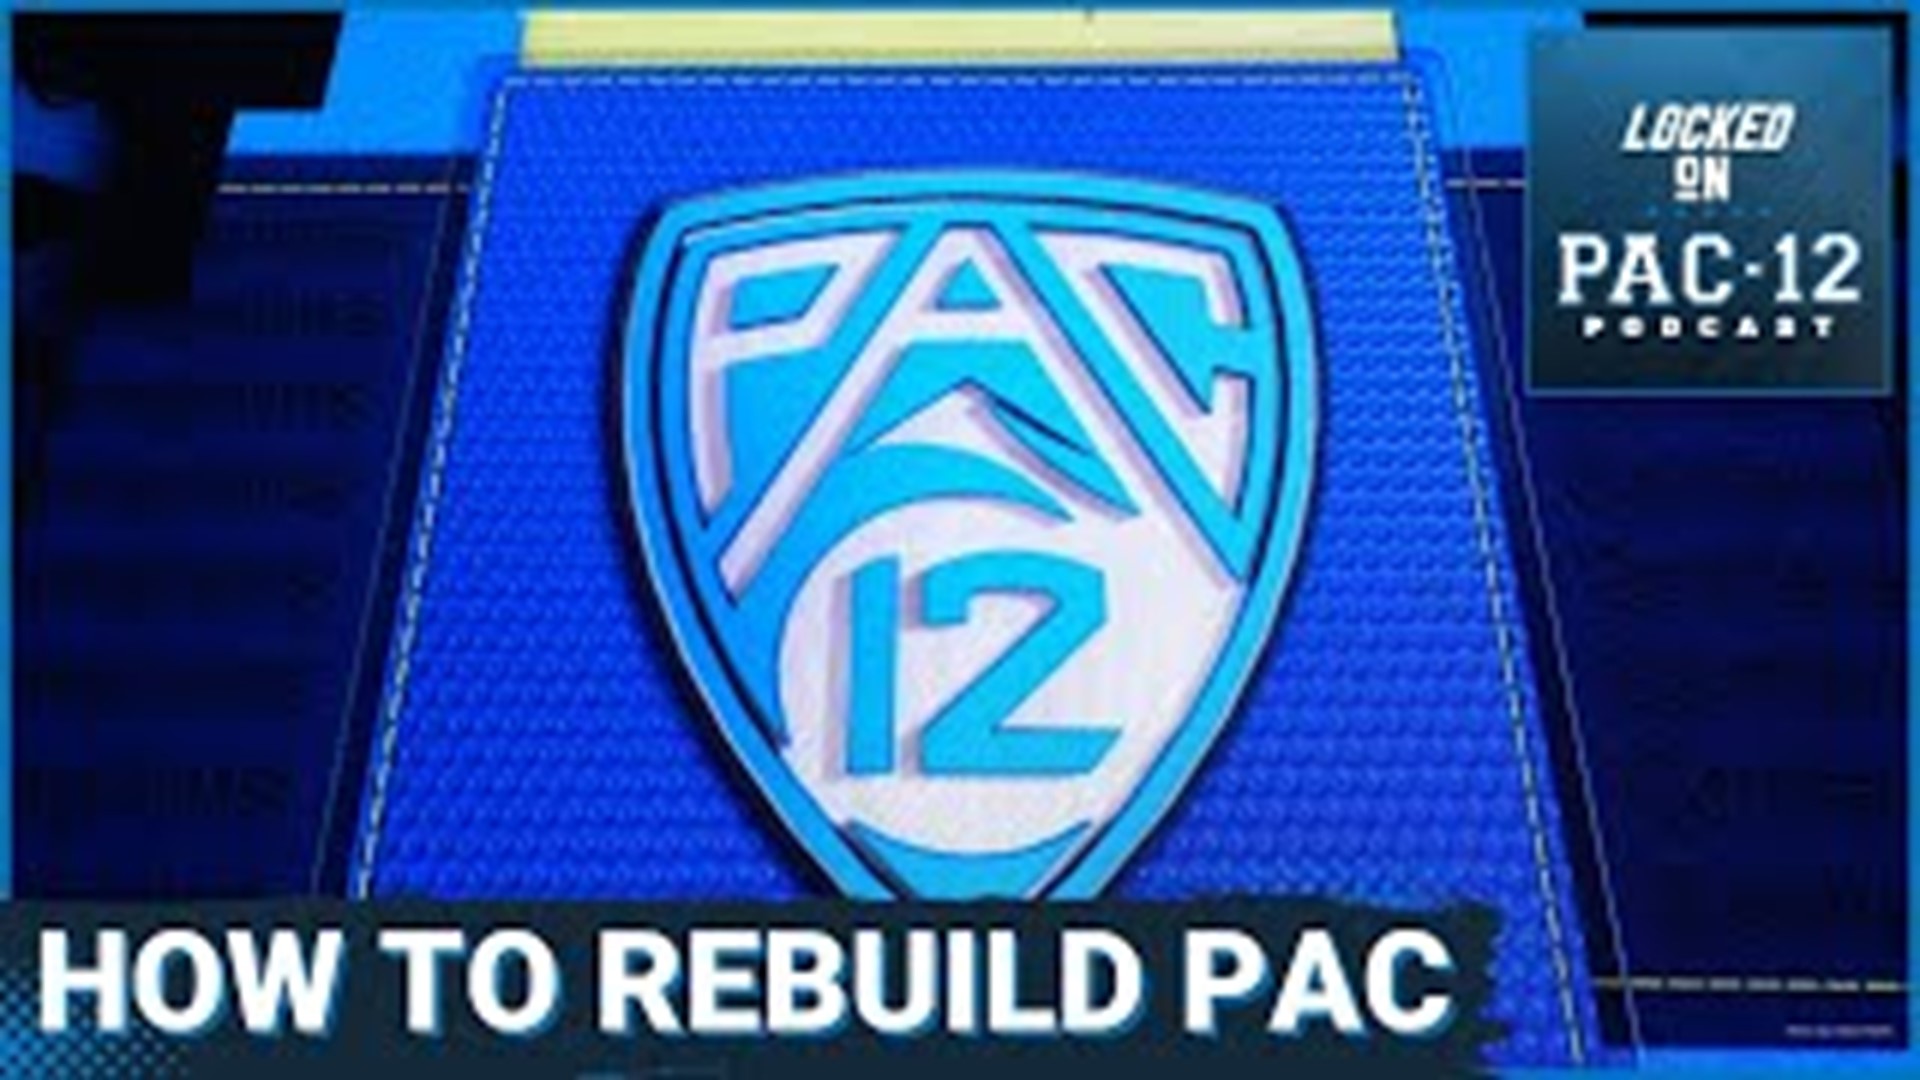 Oregon State and Washington State have options ahead of them as they ponder rebuilding the Pac-12 into a new era one day.